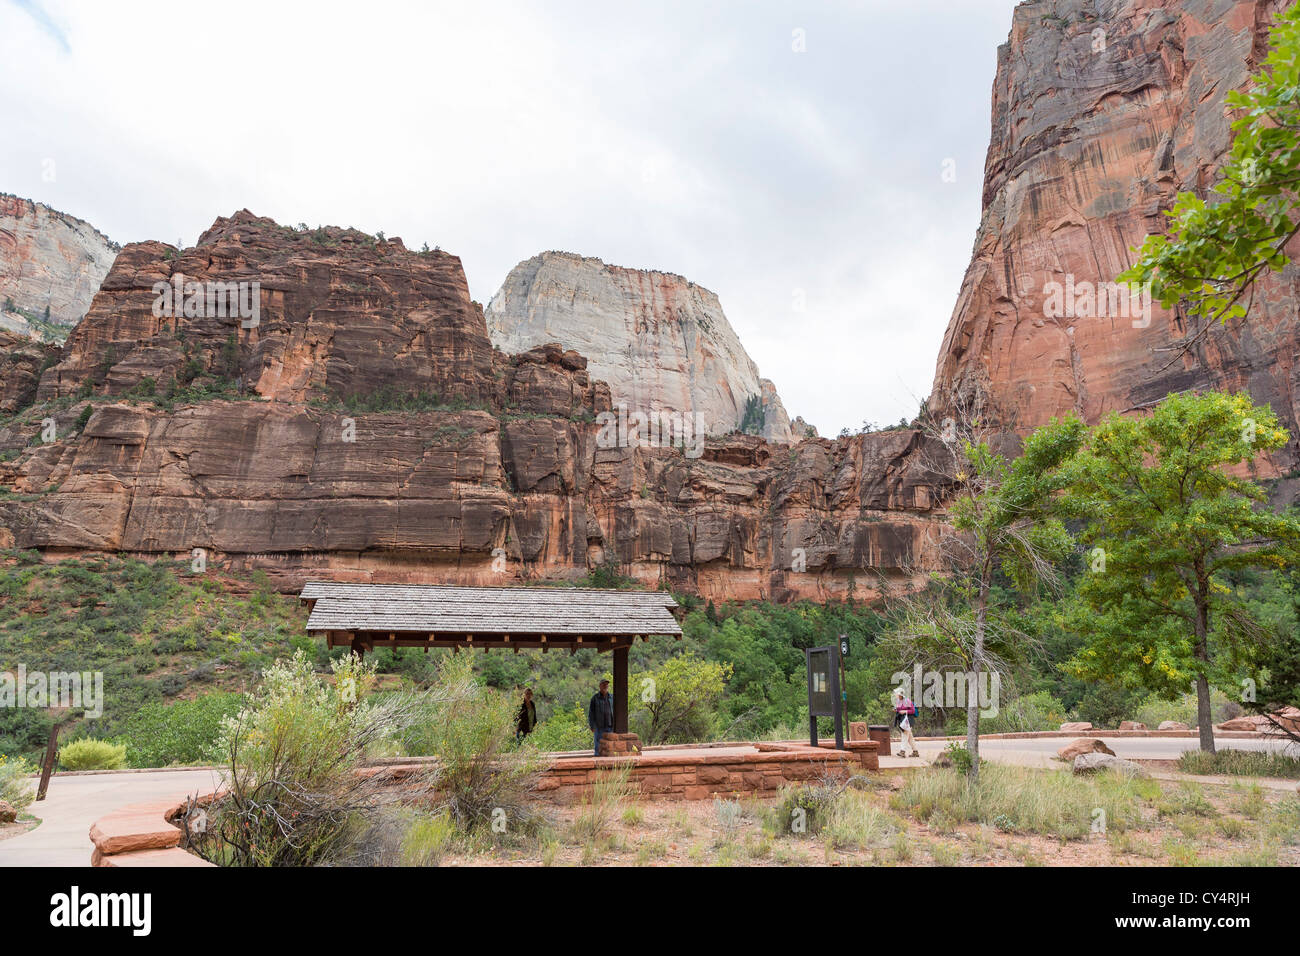 Shuttle stop at the Zion National Park, Utah Stock Photo